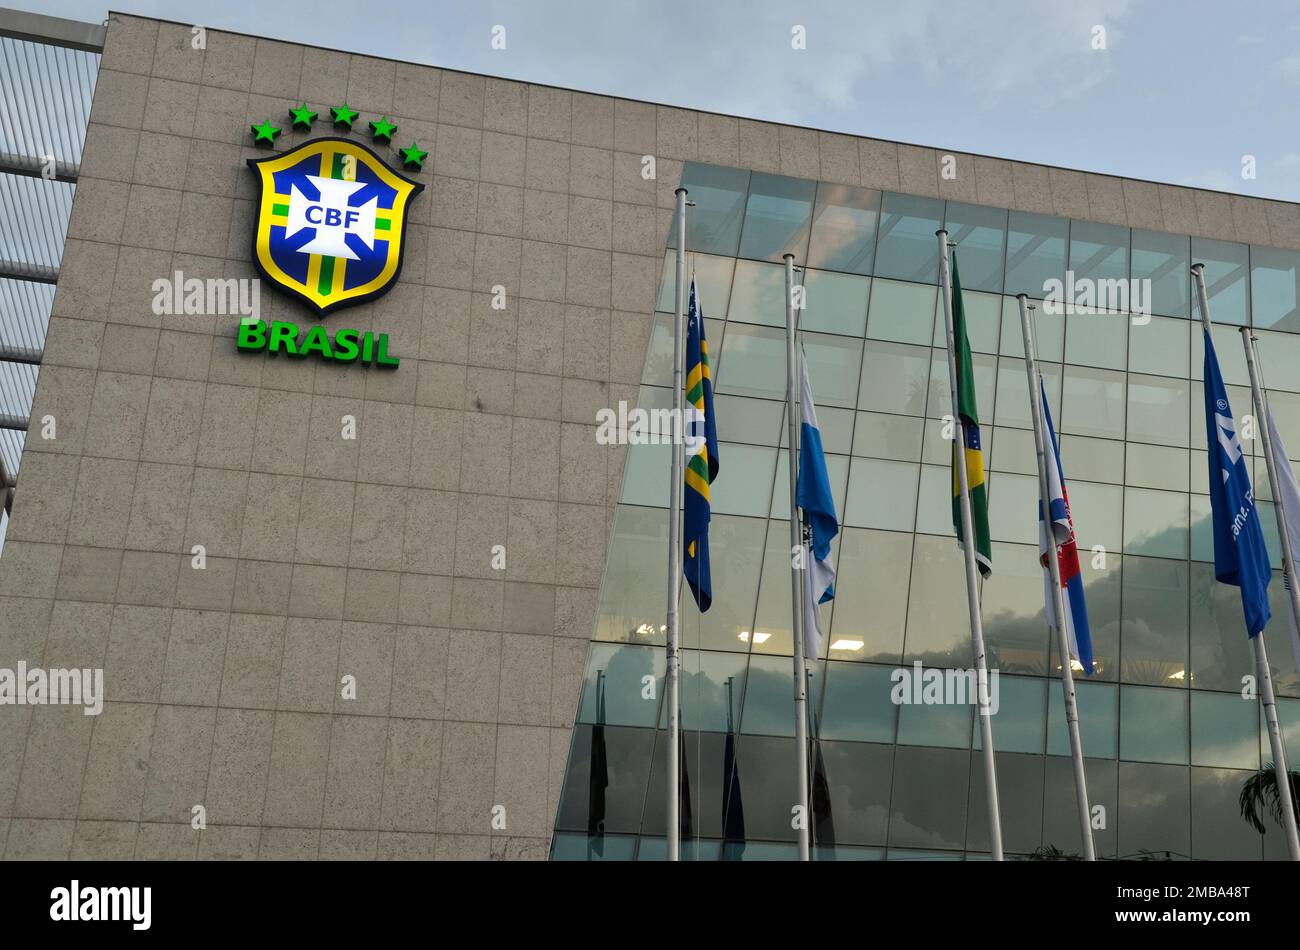 Brazilian Football Confederation CBF headquarters building, general view. The soccer confederation emblem is seen on front - 05.28.2015 Stock Photo